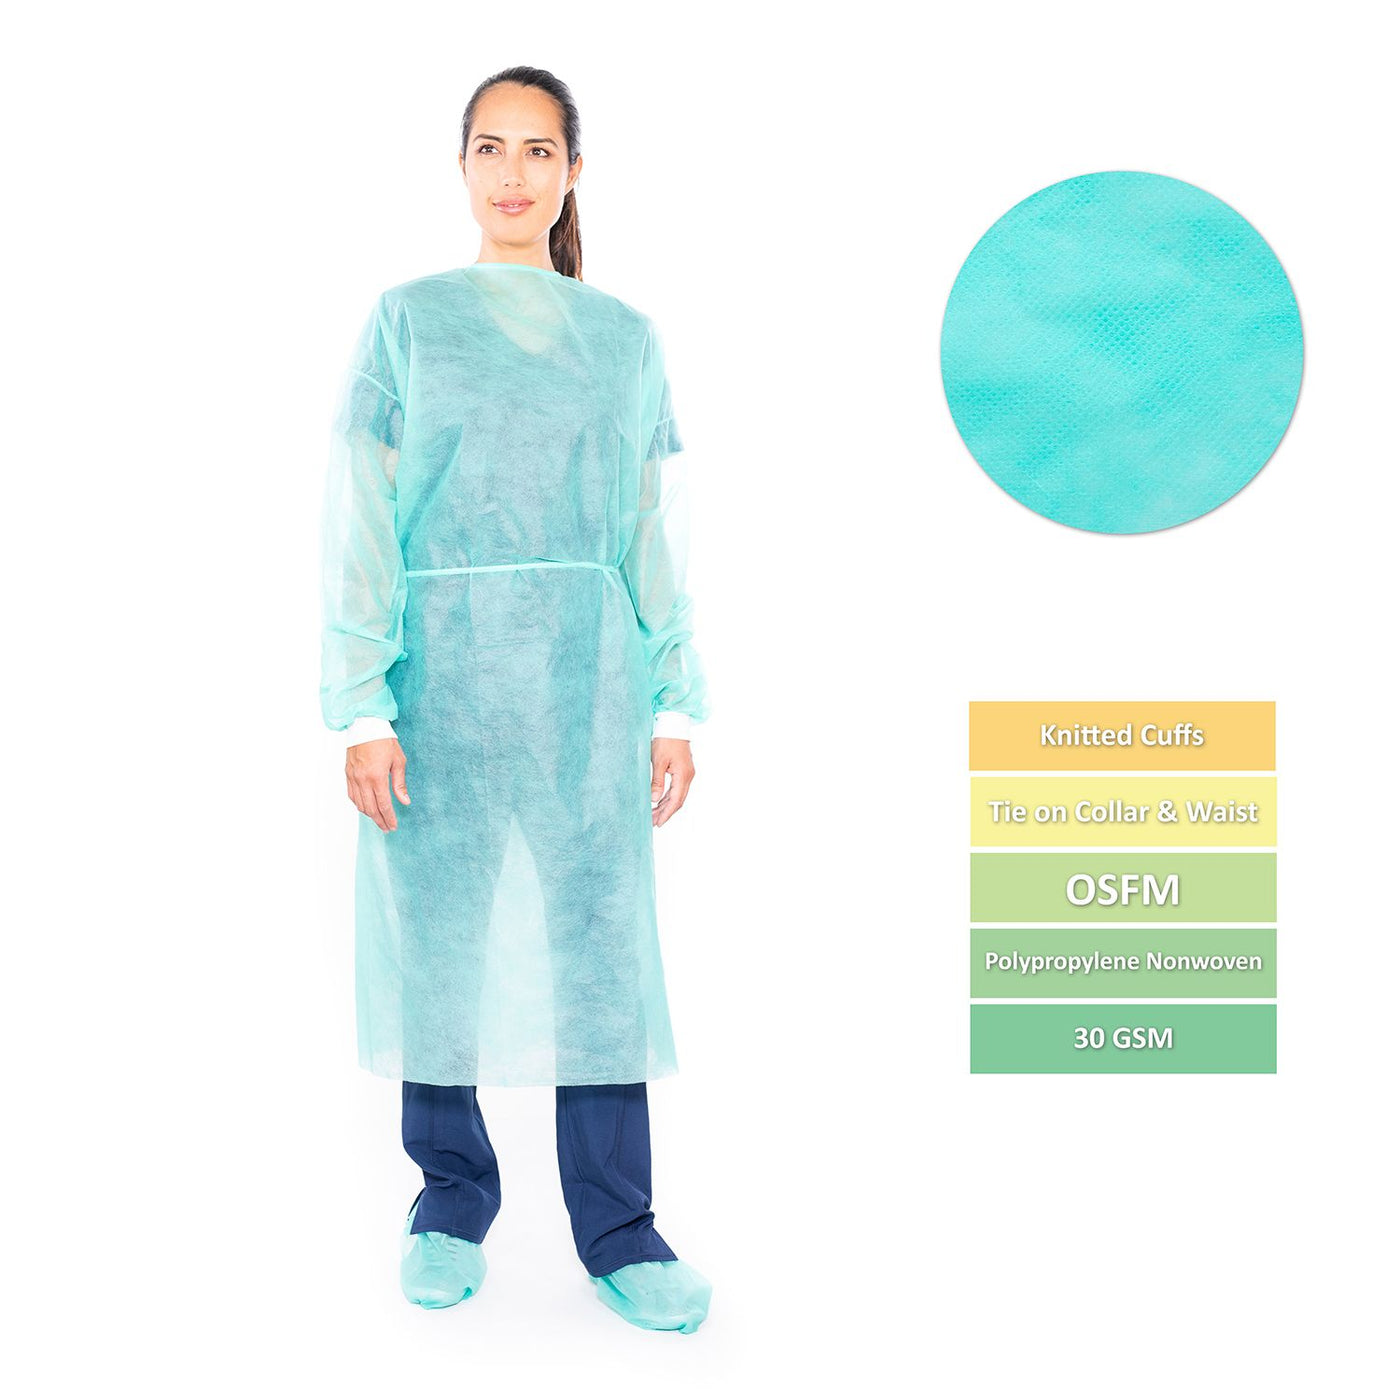 Green Disposable Isolation Gowns - Medical & PPE Gowns (Case of 50)